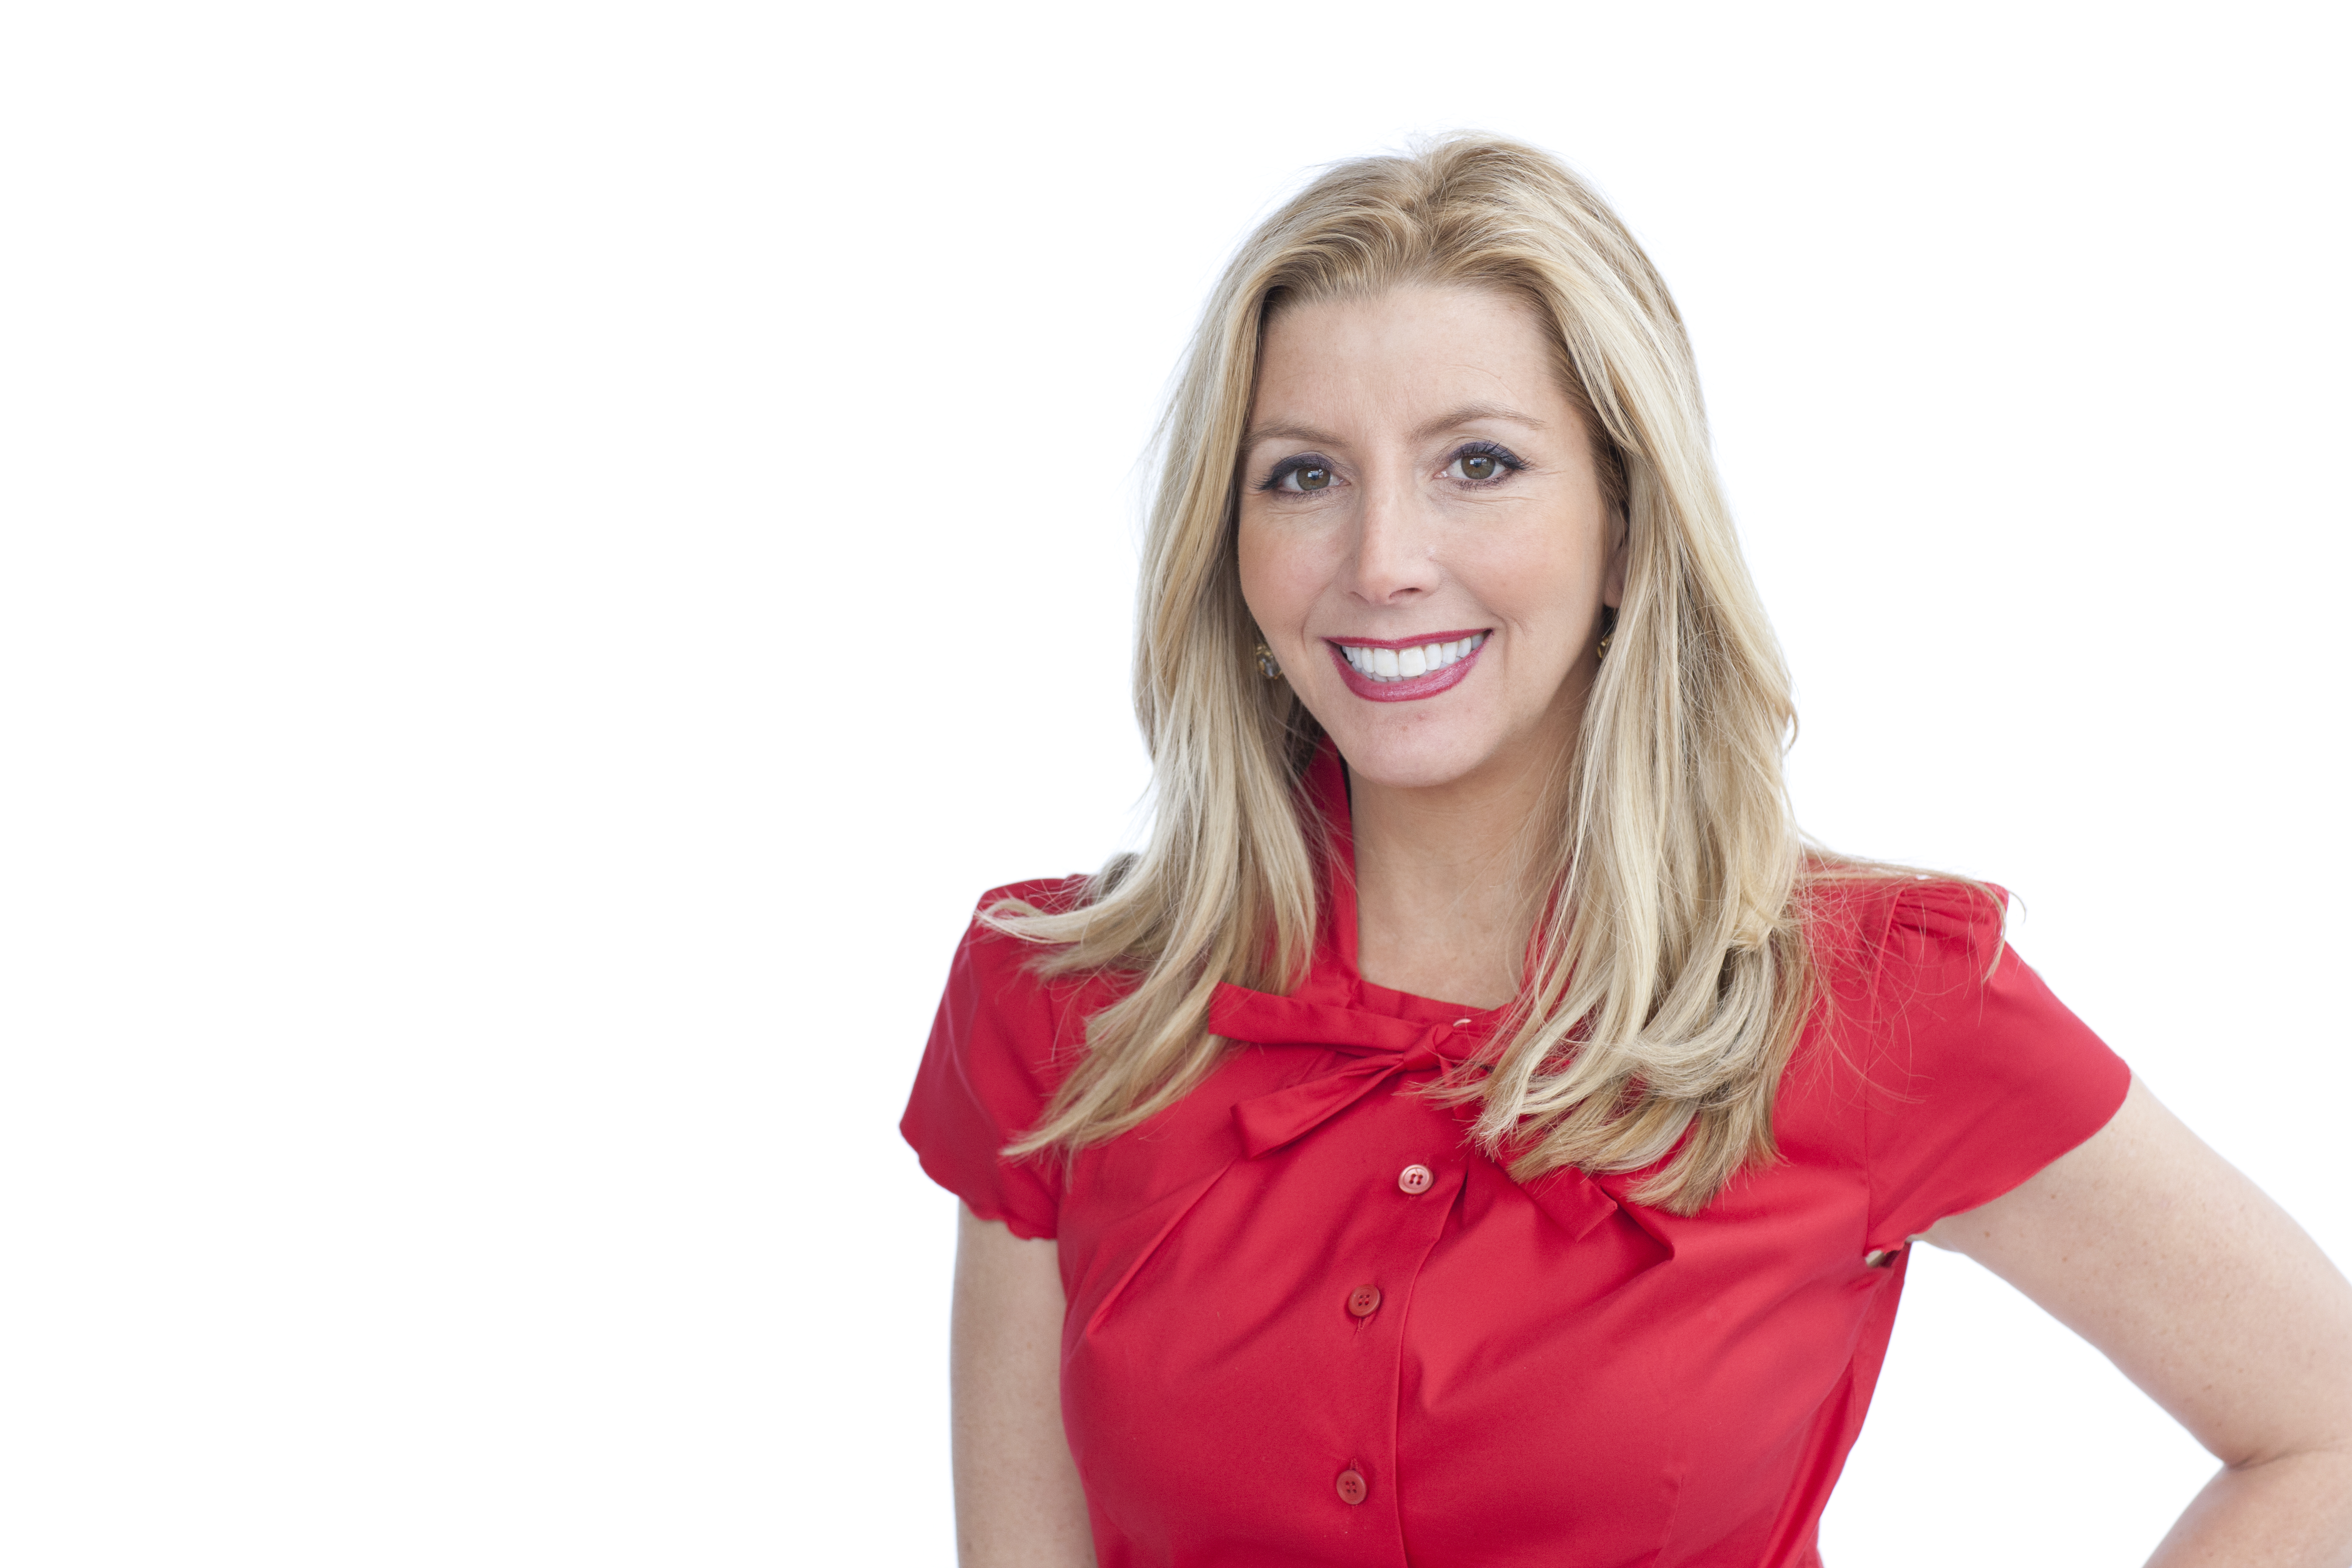 Masters of Scale: How to find your big idea, with Sara Blakely